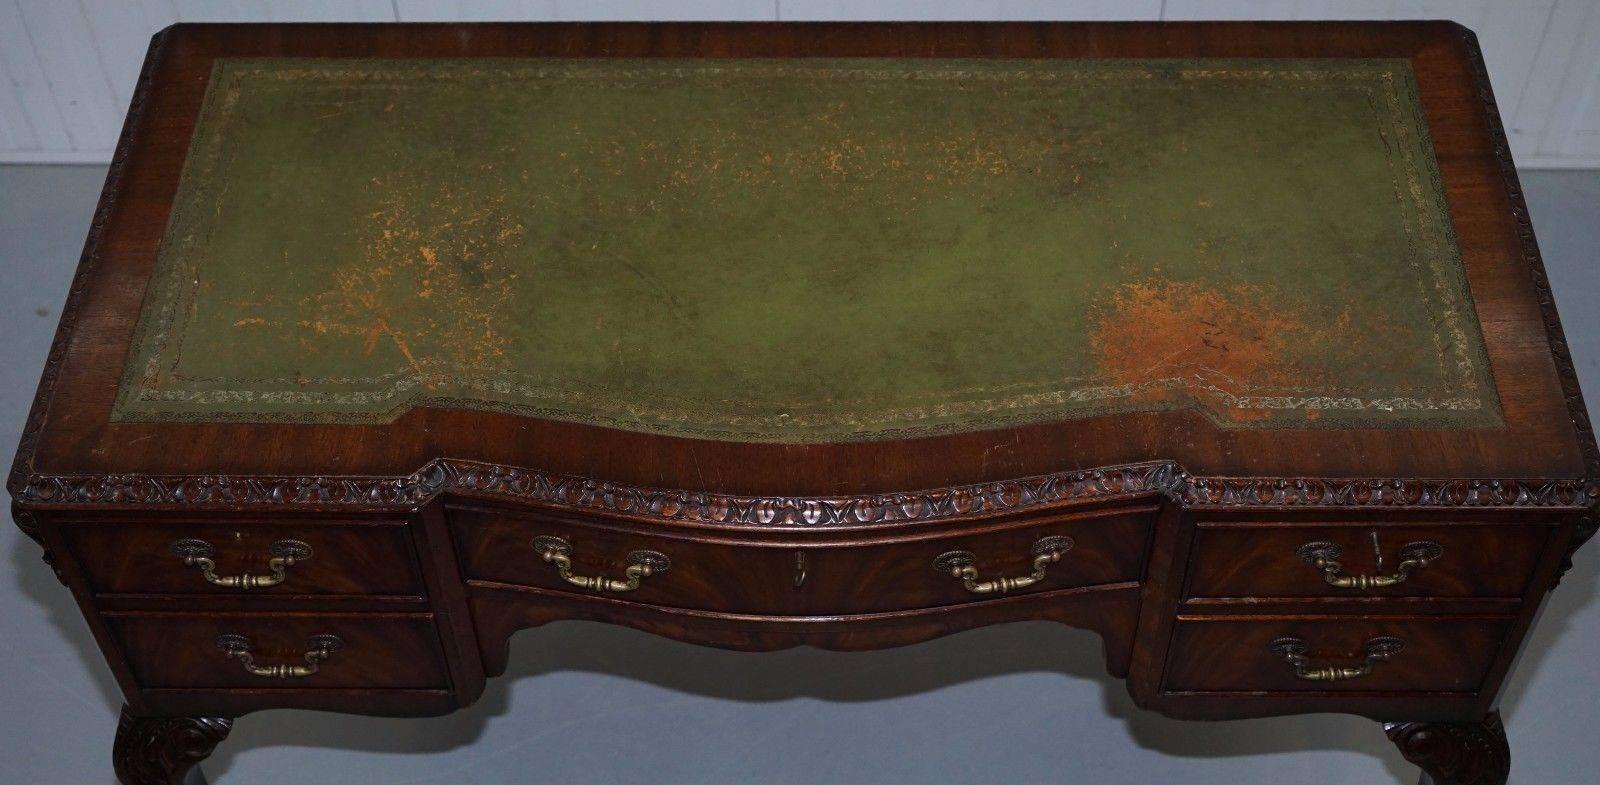 Original George Strachan and Son Leeds Vintage Flamed Mahogany Writing Desk 4